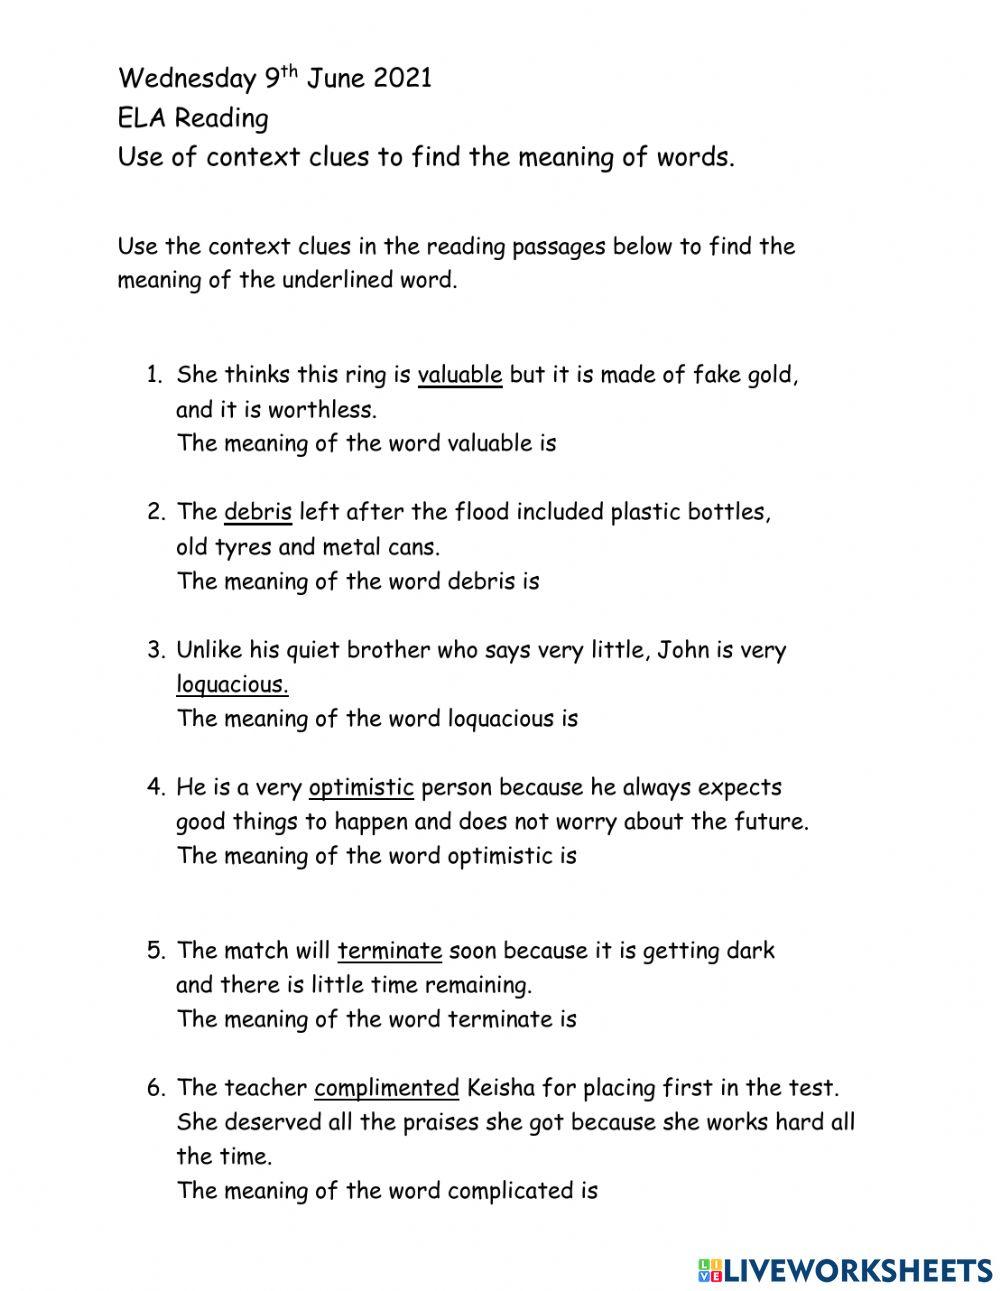 Live worksheet on use of context clues